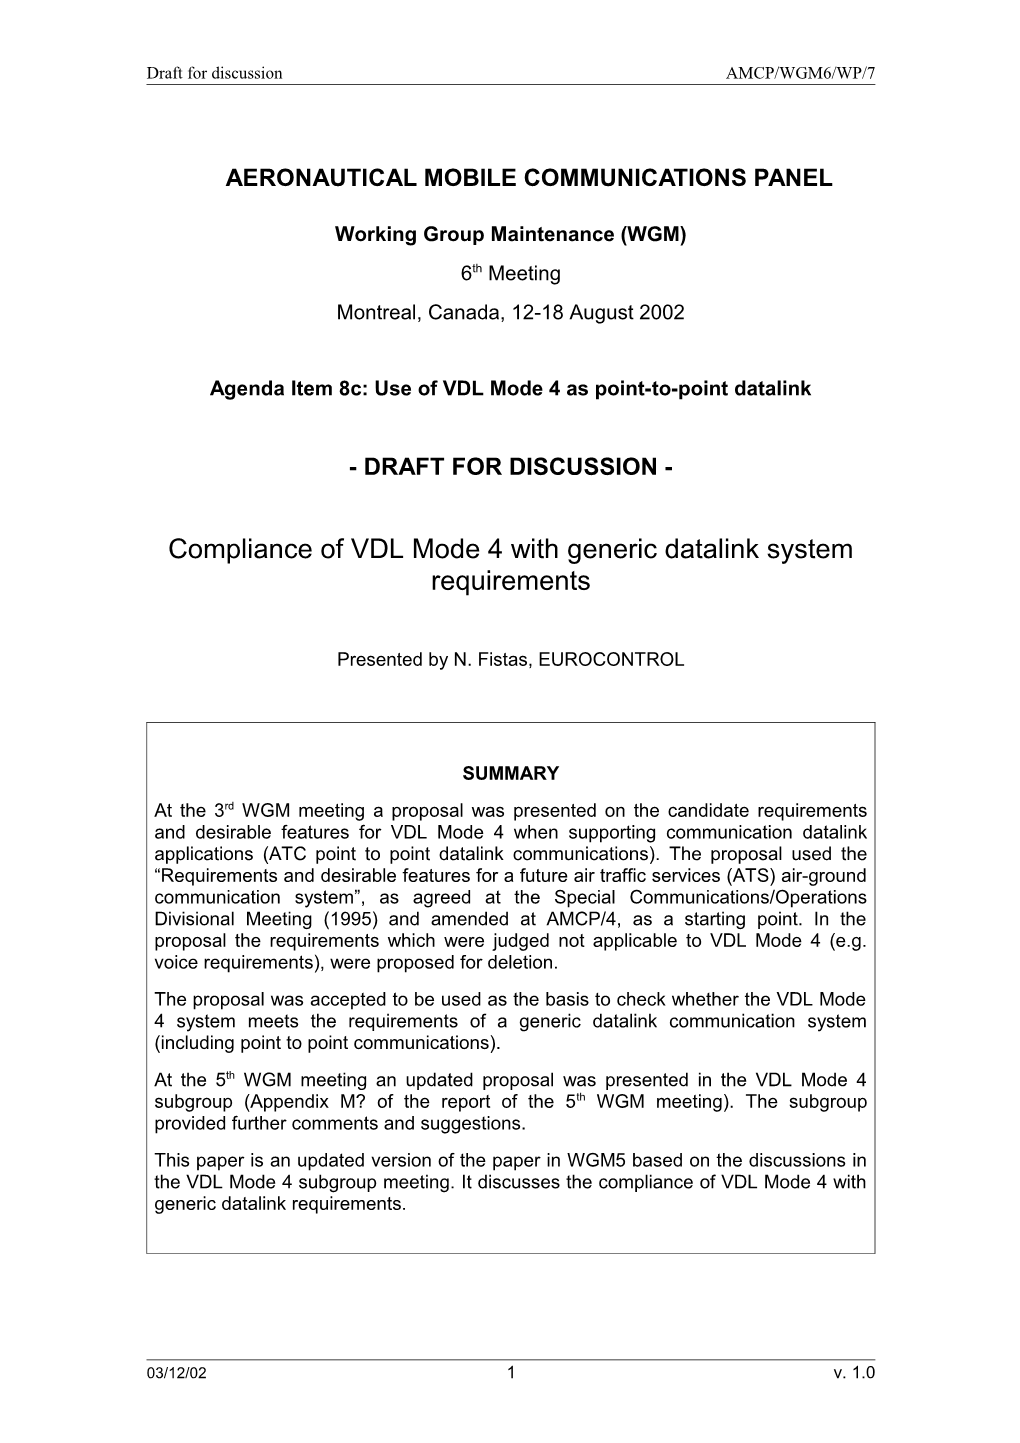 Compliance of VDL Mode-4 with Generic Data Link Systems Requirements